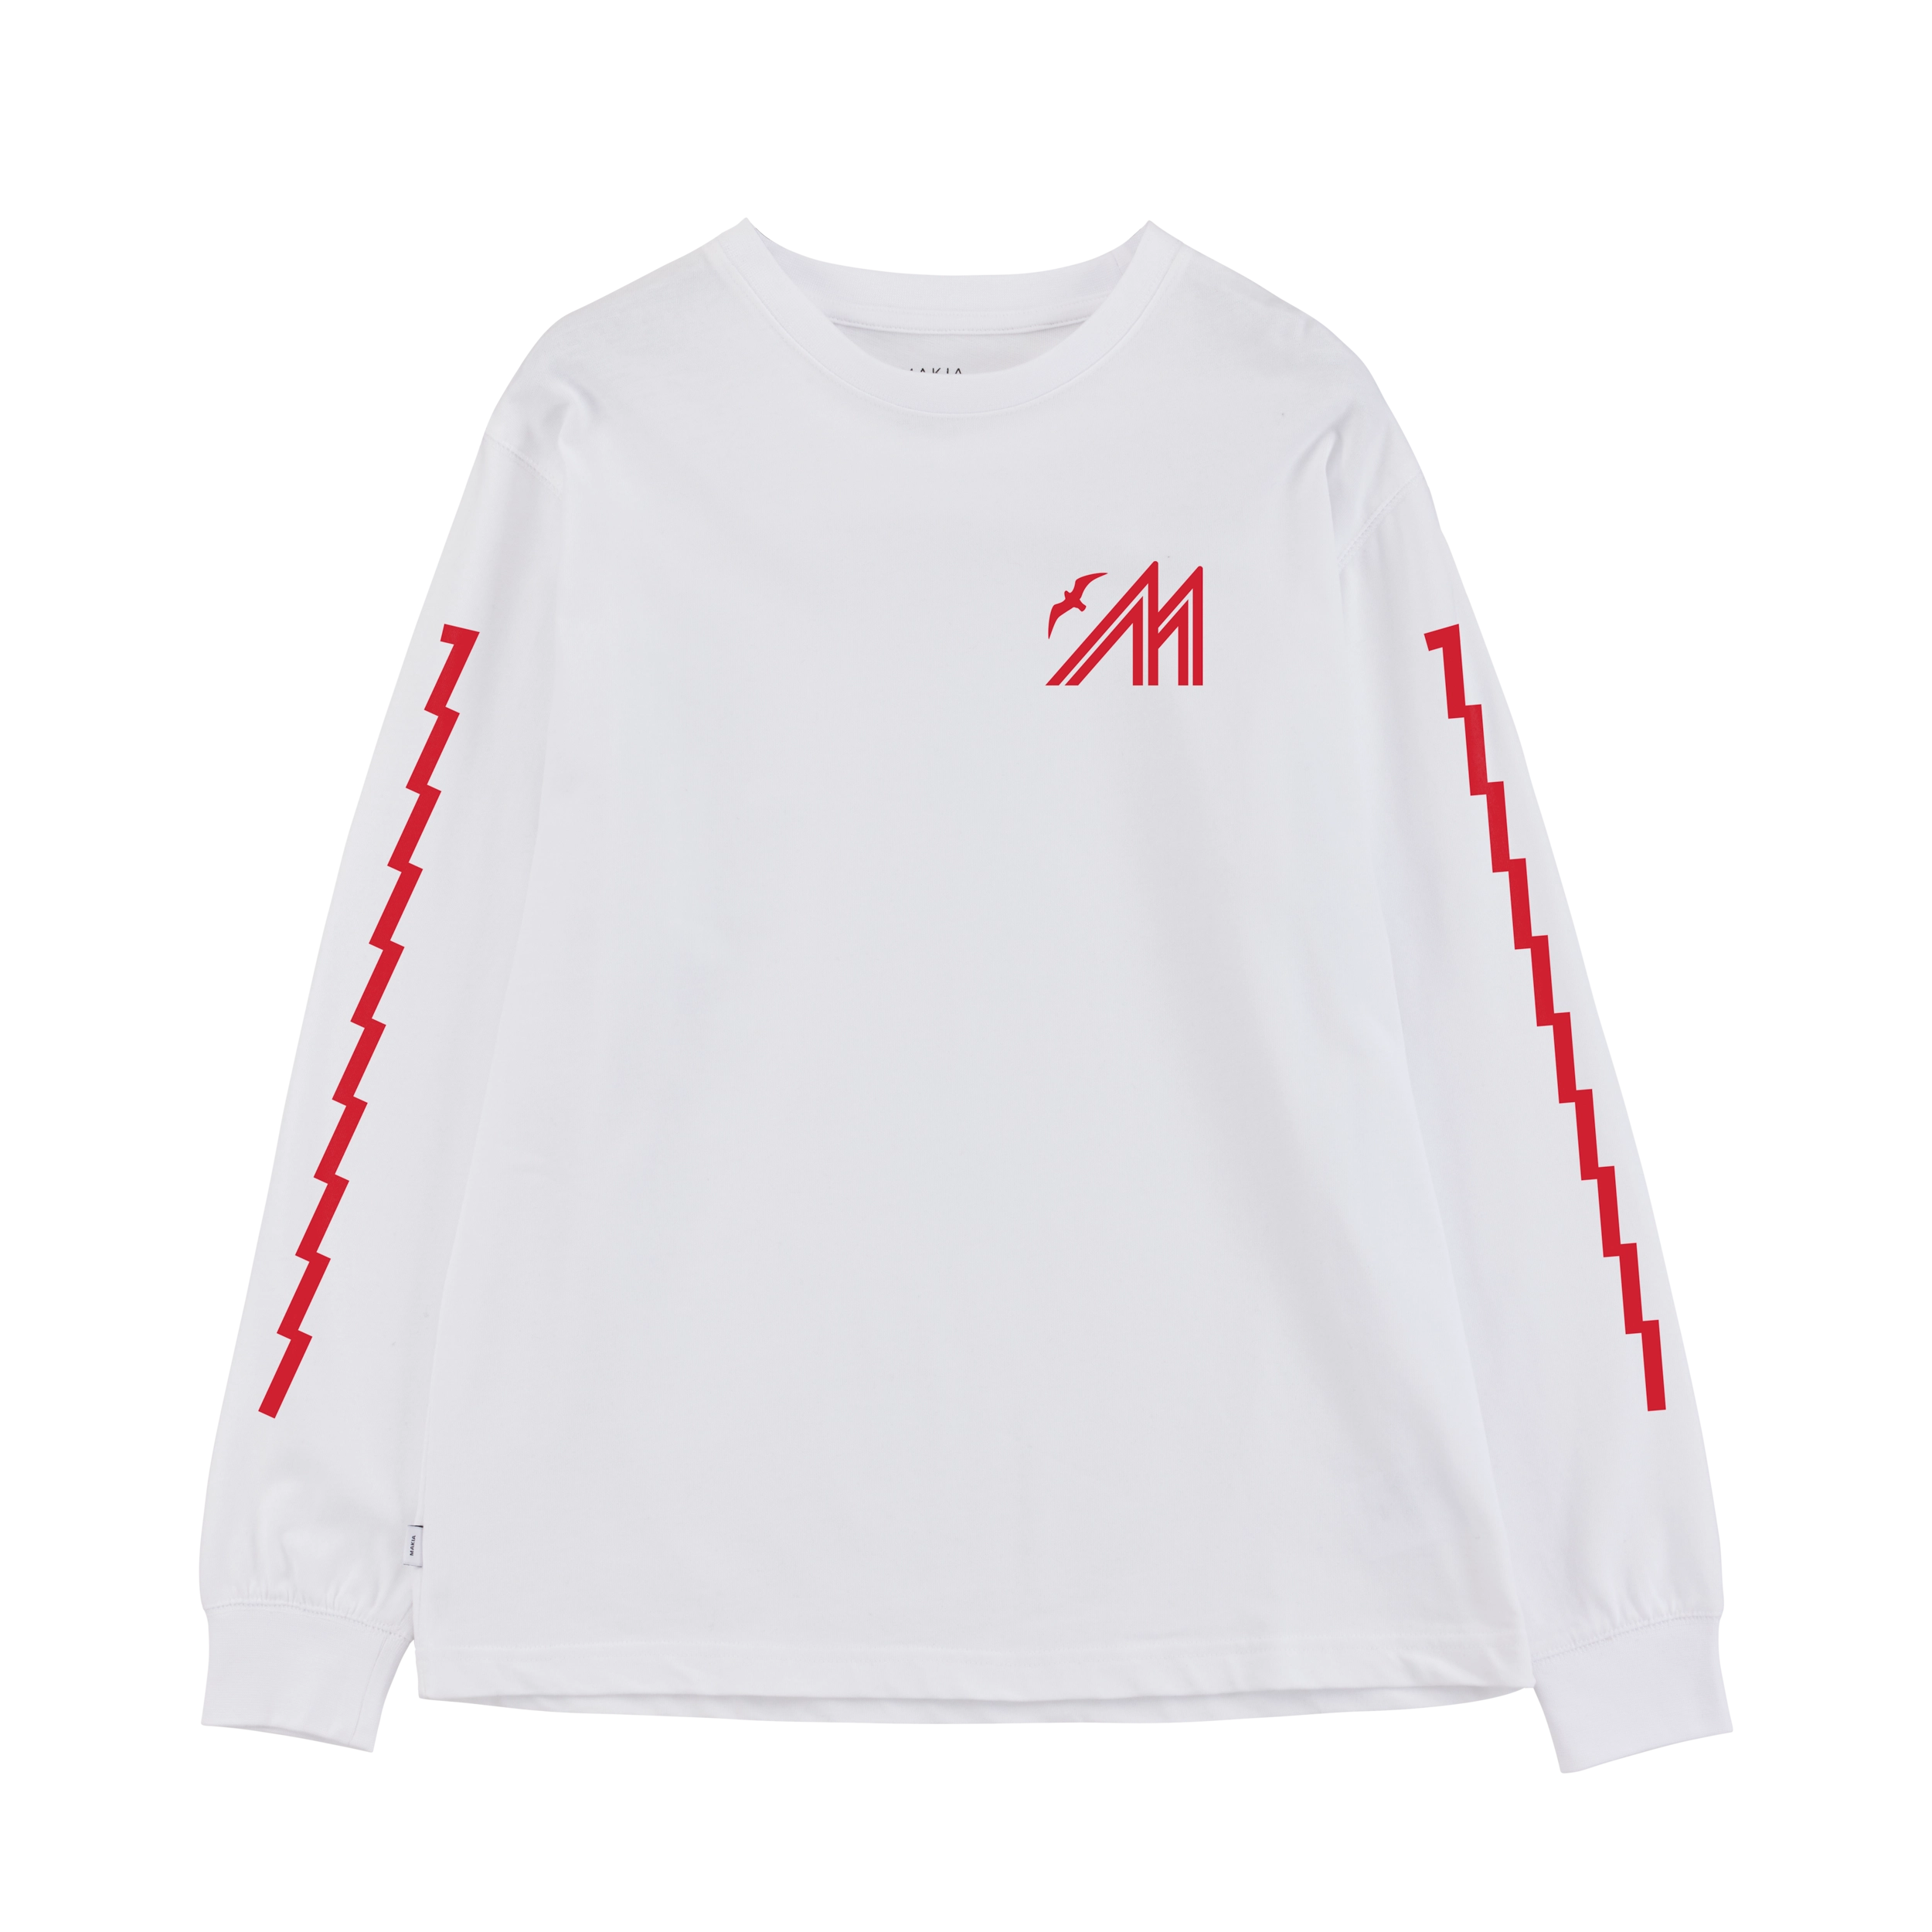 White long sleeve shirt with Merenkävijät print on back in navy and red